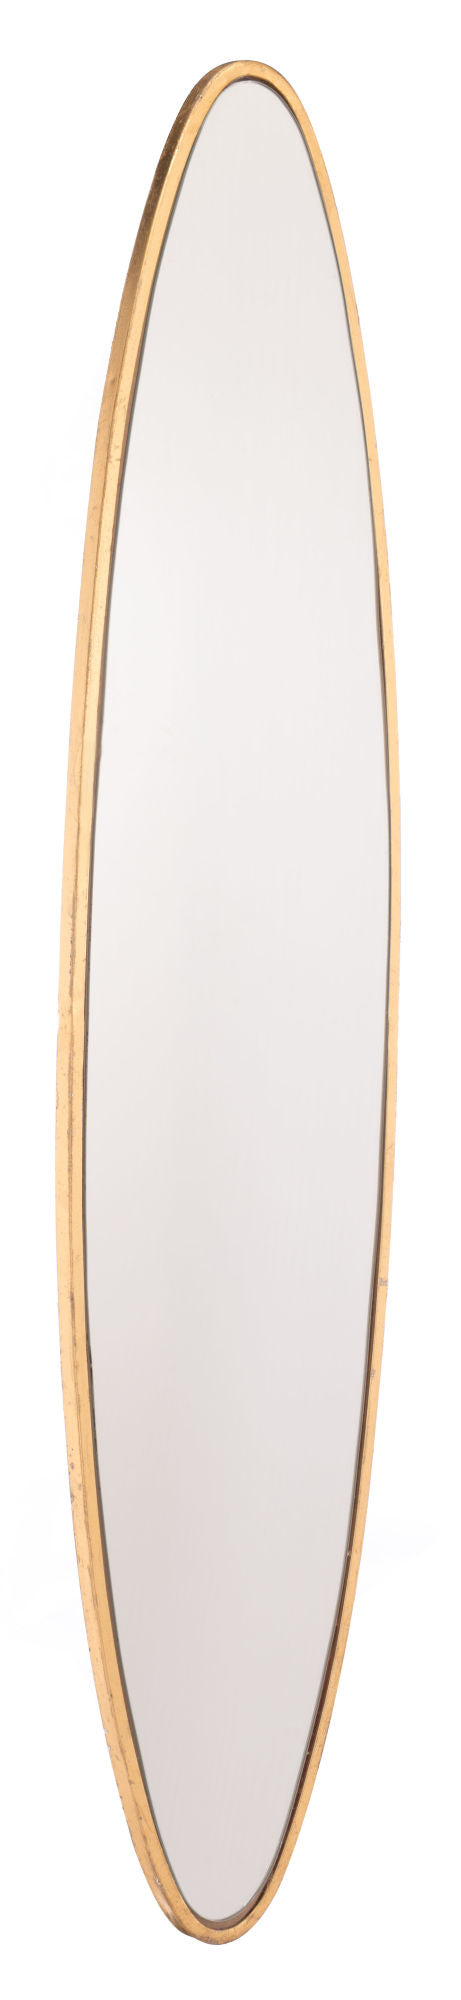 Oval Gold Mirror Lg